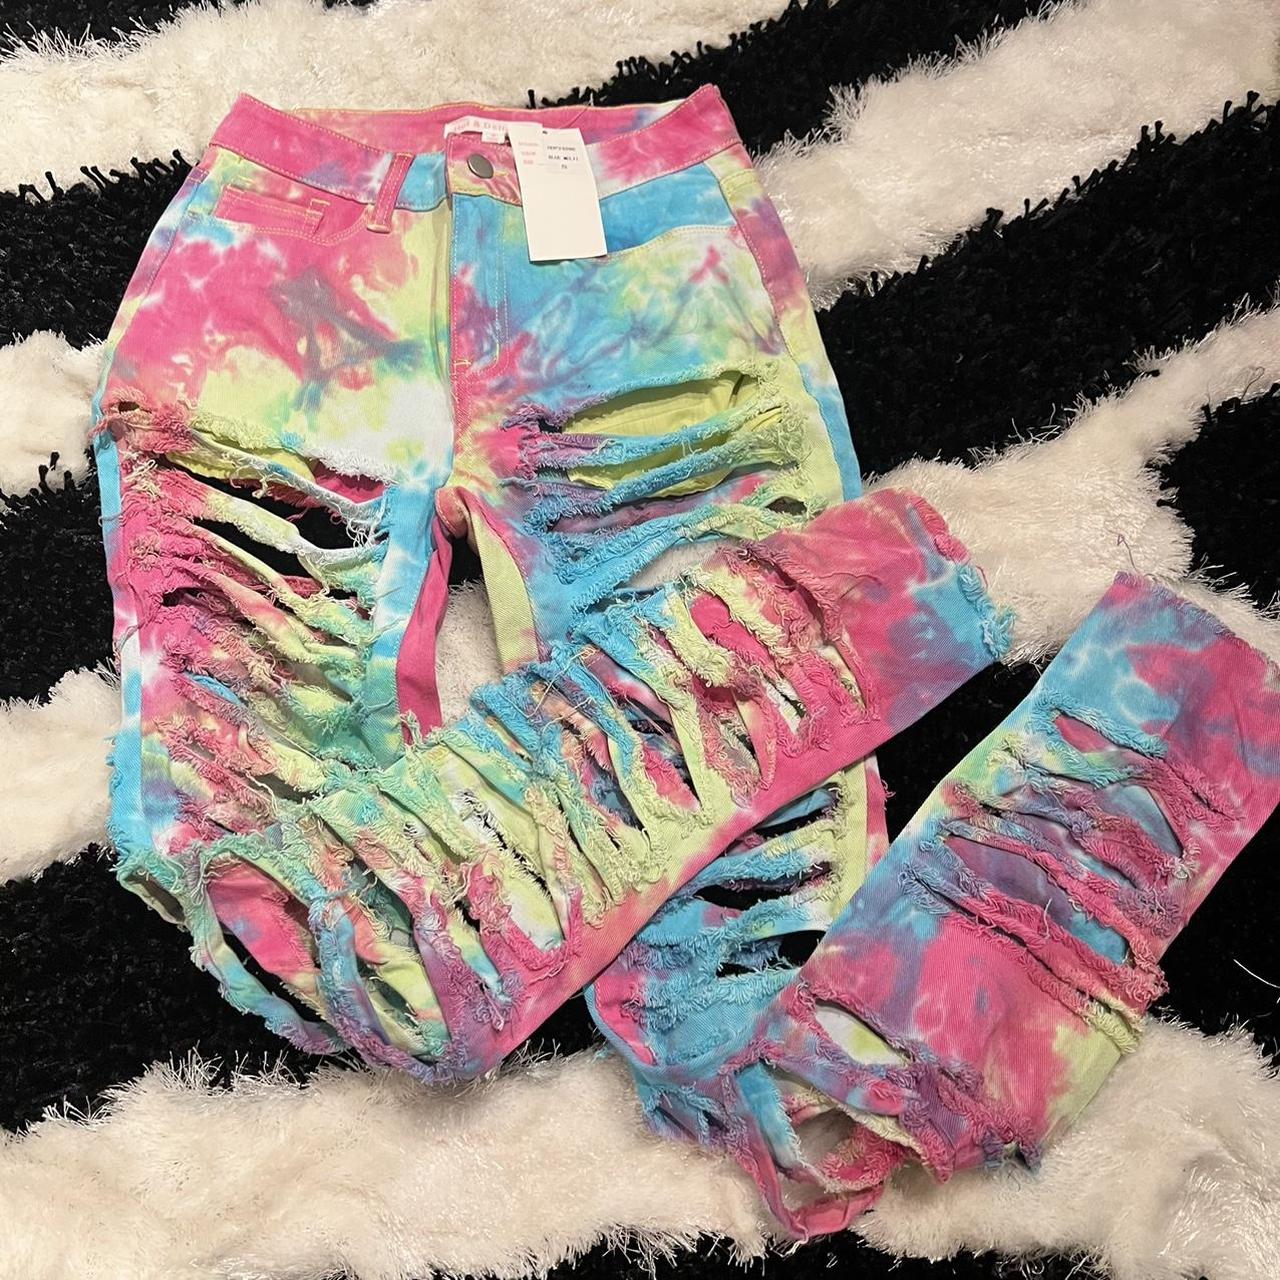 RAINBOW TIEDYE MEGA RIPPED JEANS BY HOT & DELICIOUS... - Depop